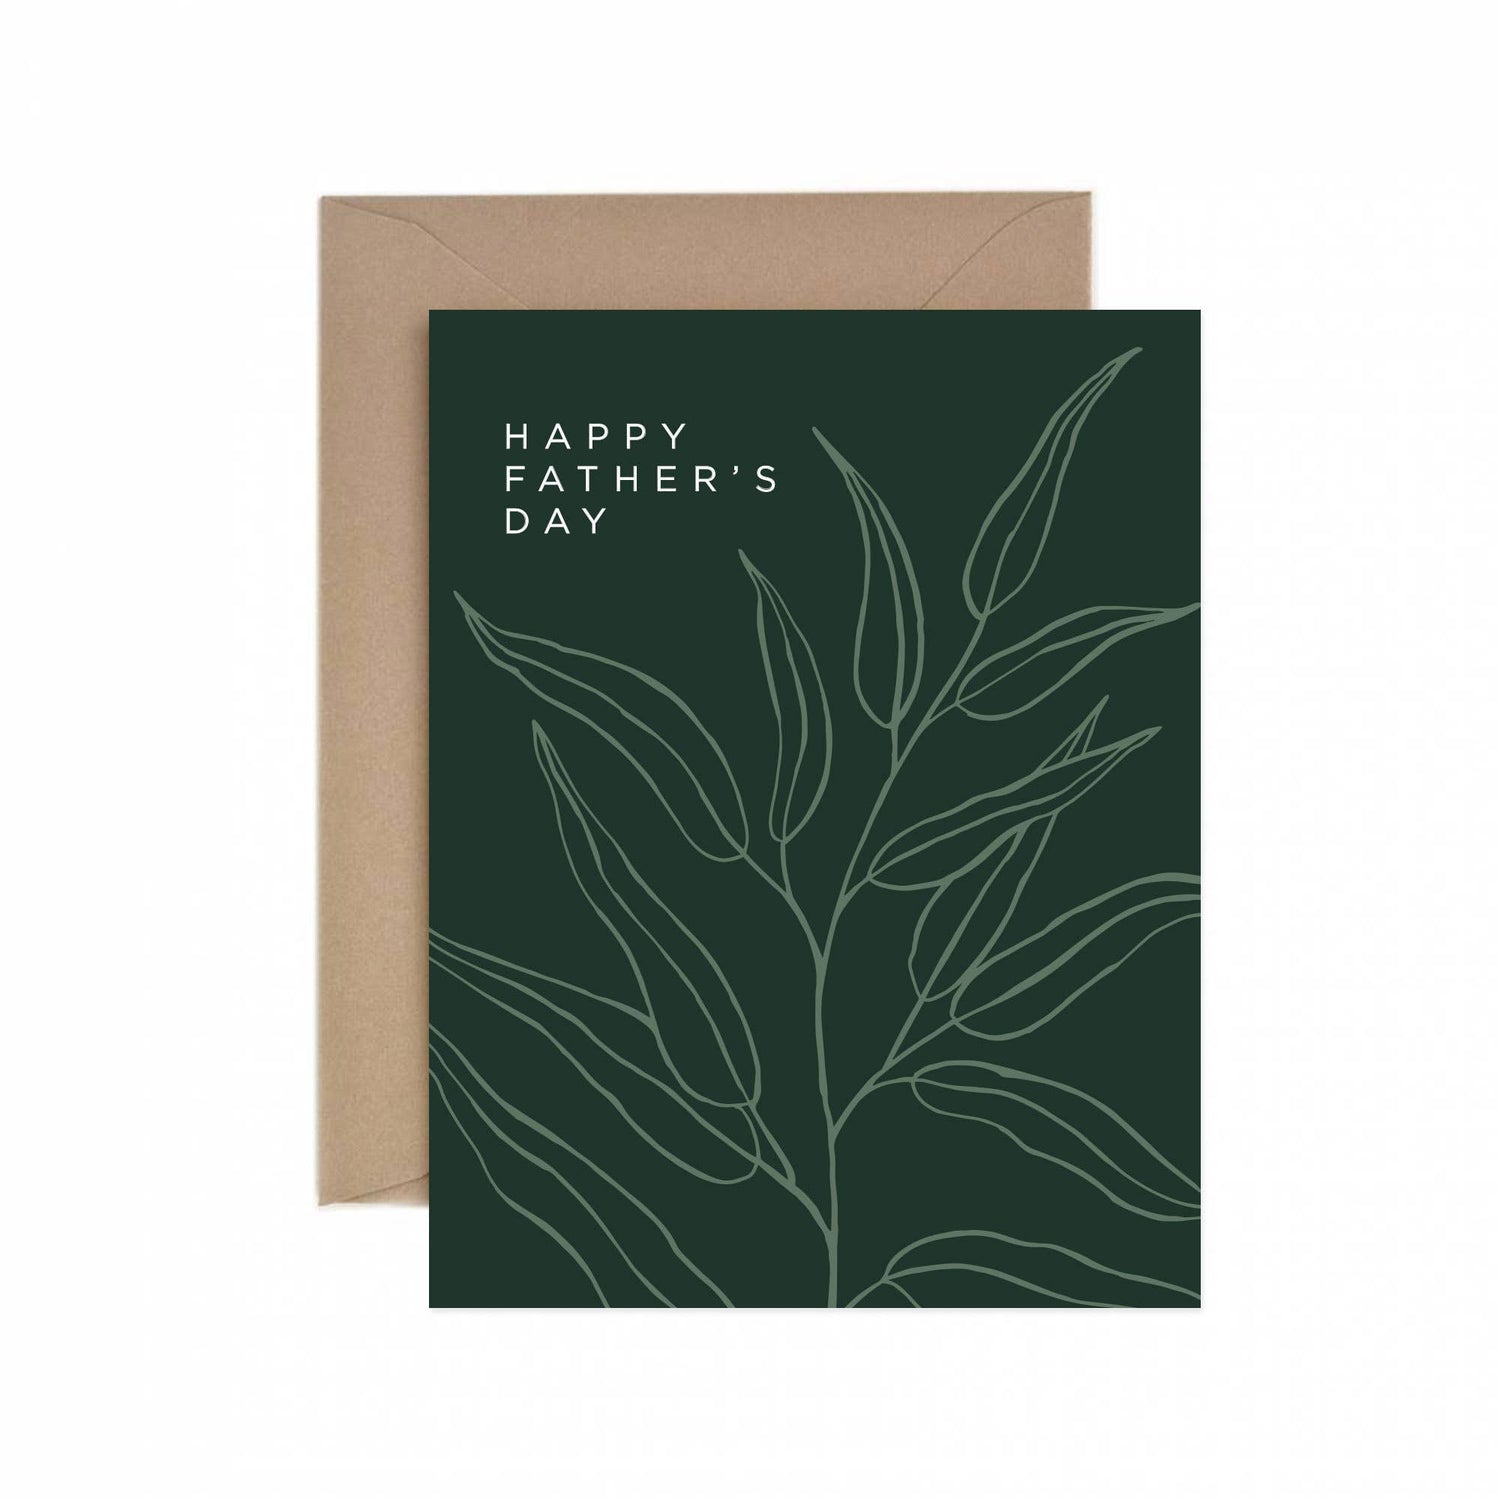 Happy Father's Day Greeting Card - The Botanical Bar